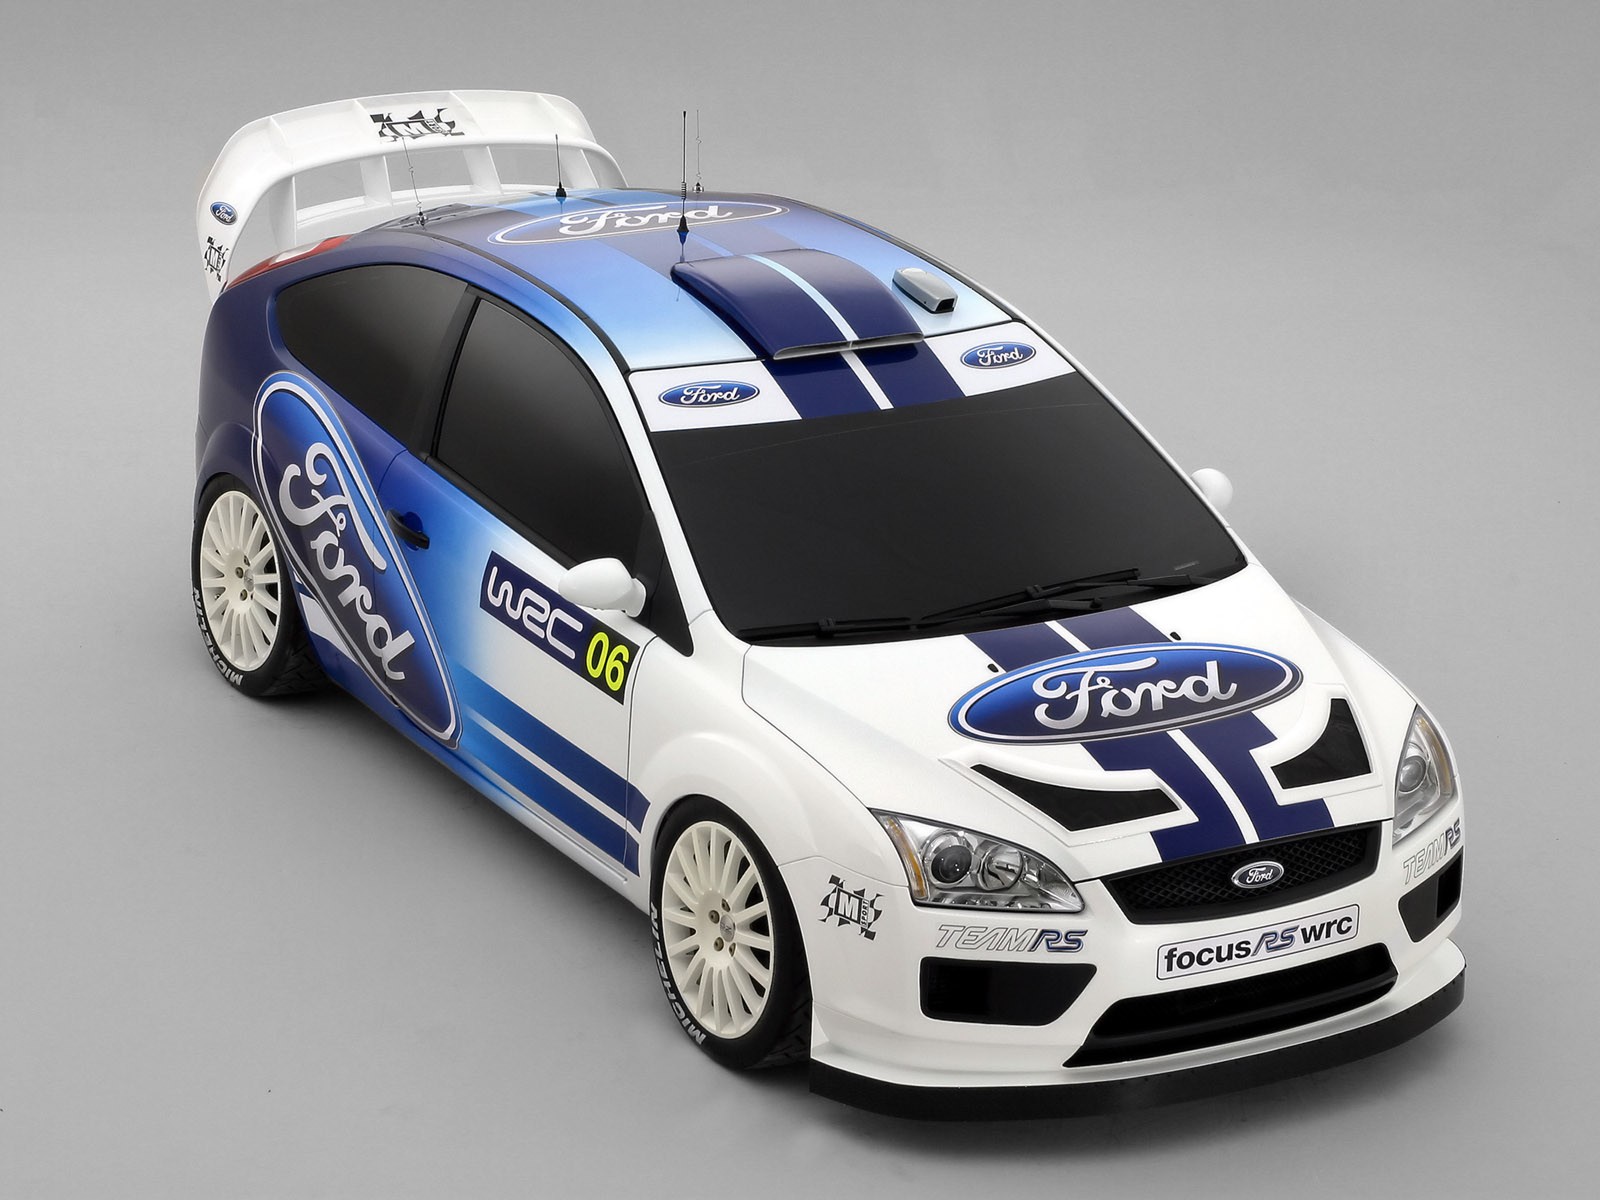 Download full size Ford Focus WRC 2006 01 Ford wallpaper / 1600x1200